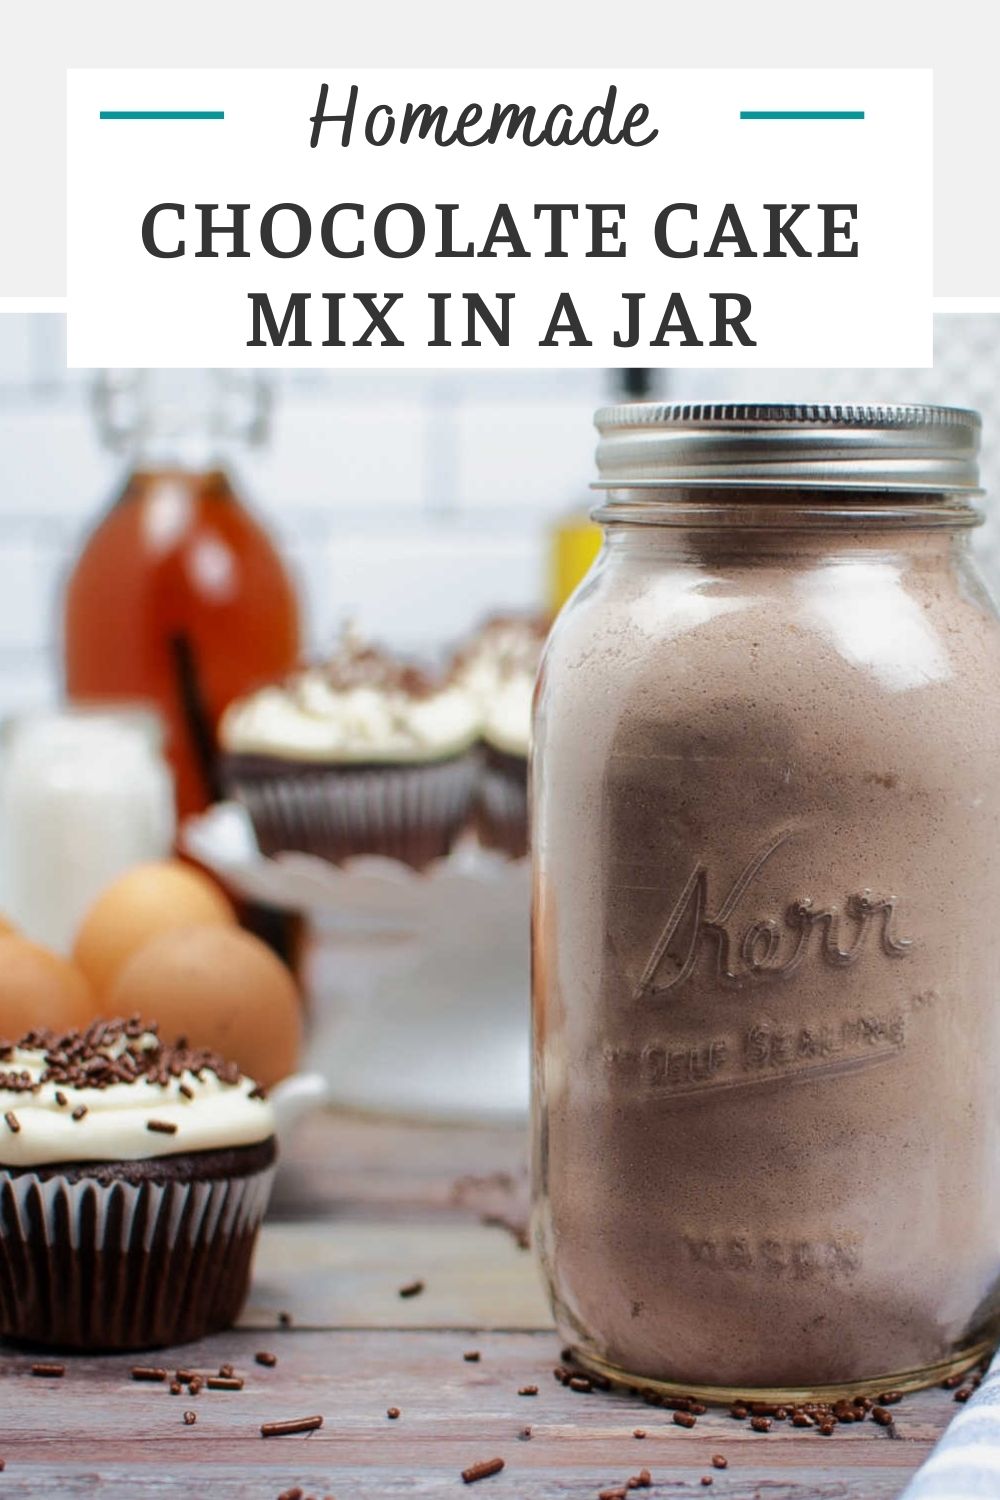 Next time you want a chocolate cake, instead of reaching for a box grab a homemade chocolate cake mix. You can whip up several in just a few minutes and there are no preservatives. Taking it from the jar to cake batter just takes a couple of standard ingredients and almost no effort.